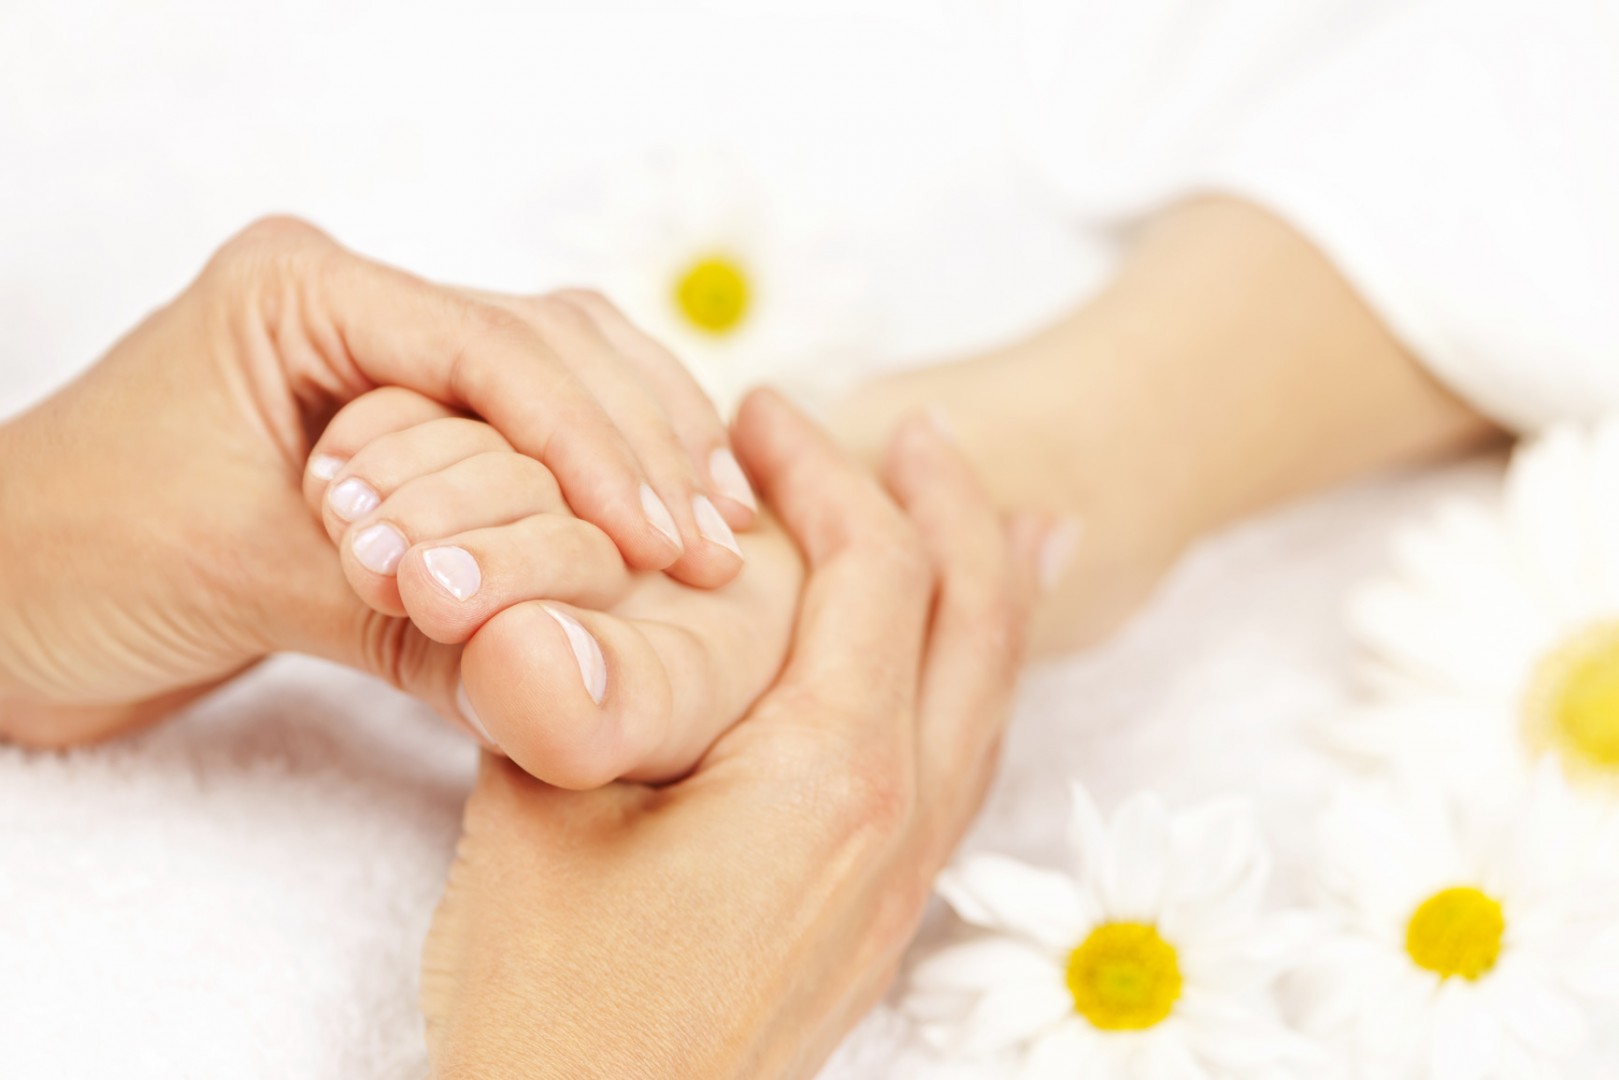 foot-zone-therapy-tapping-into-nerve-systems-for-overall-health-st-george-news